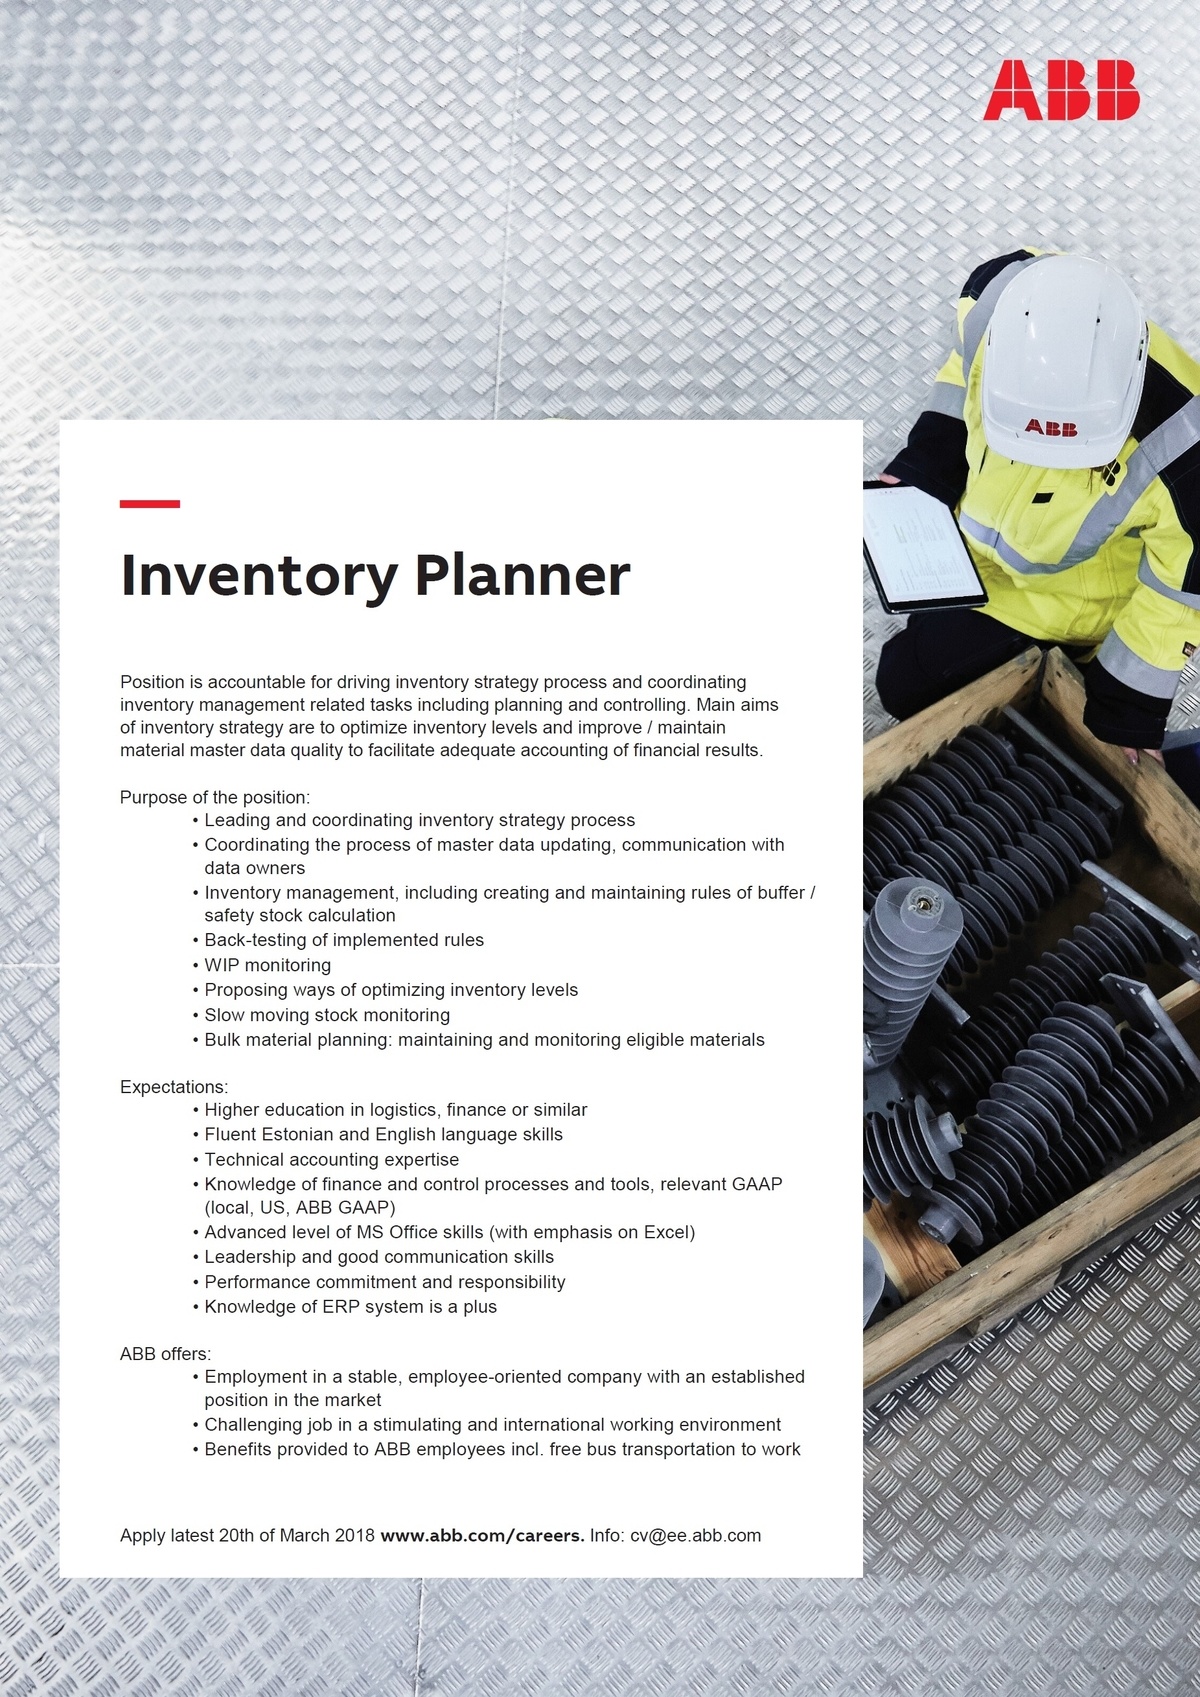 ABB AS Inventory Planner